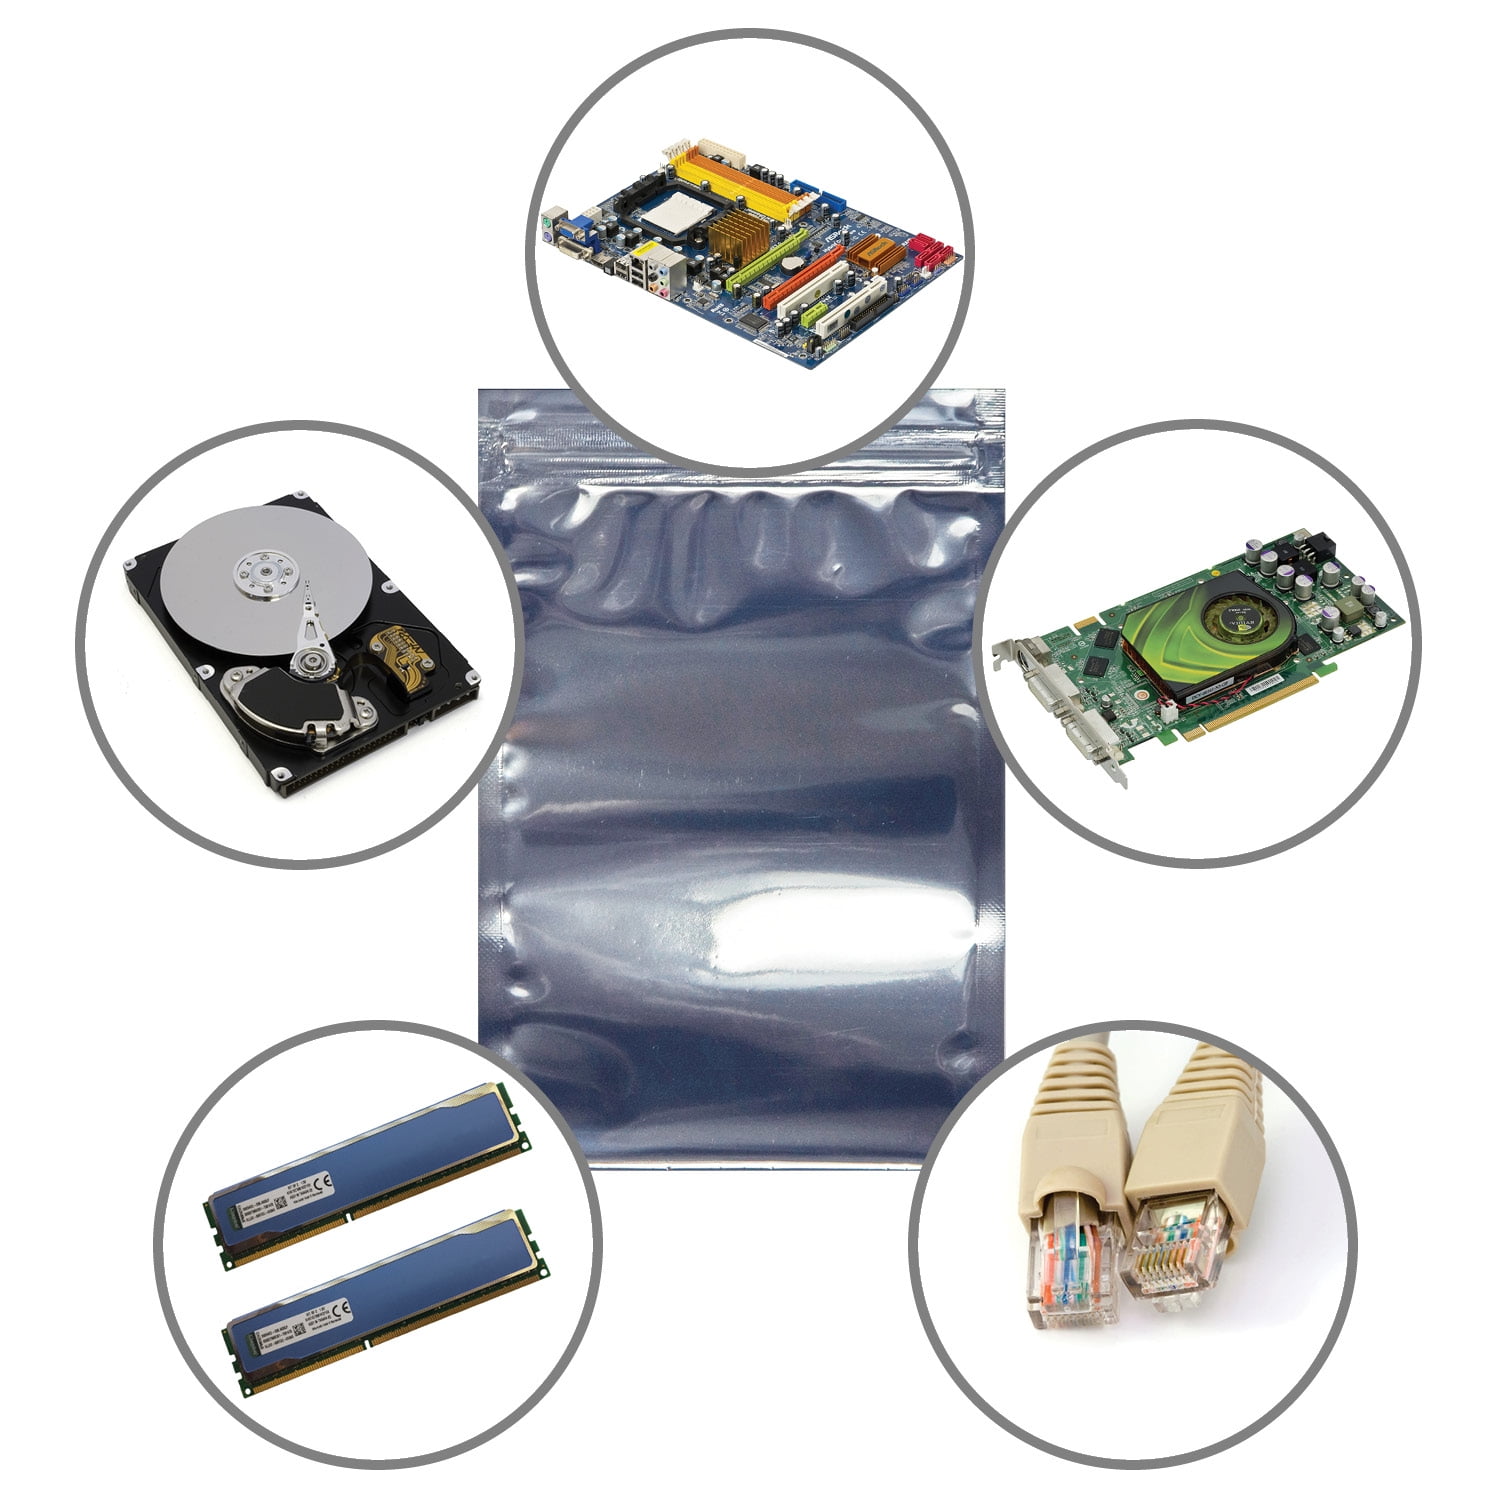 Antistatic Bags ESD Shielding Bag with Anti-Static Labels for Hard Drive  SSD HDD Motherboard Video Card RAM Electronic Devices (20pc ziplock 12 * 16  in) 